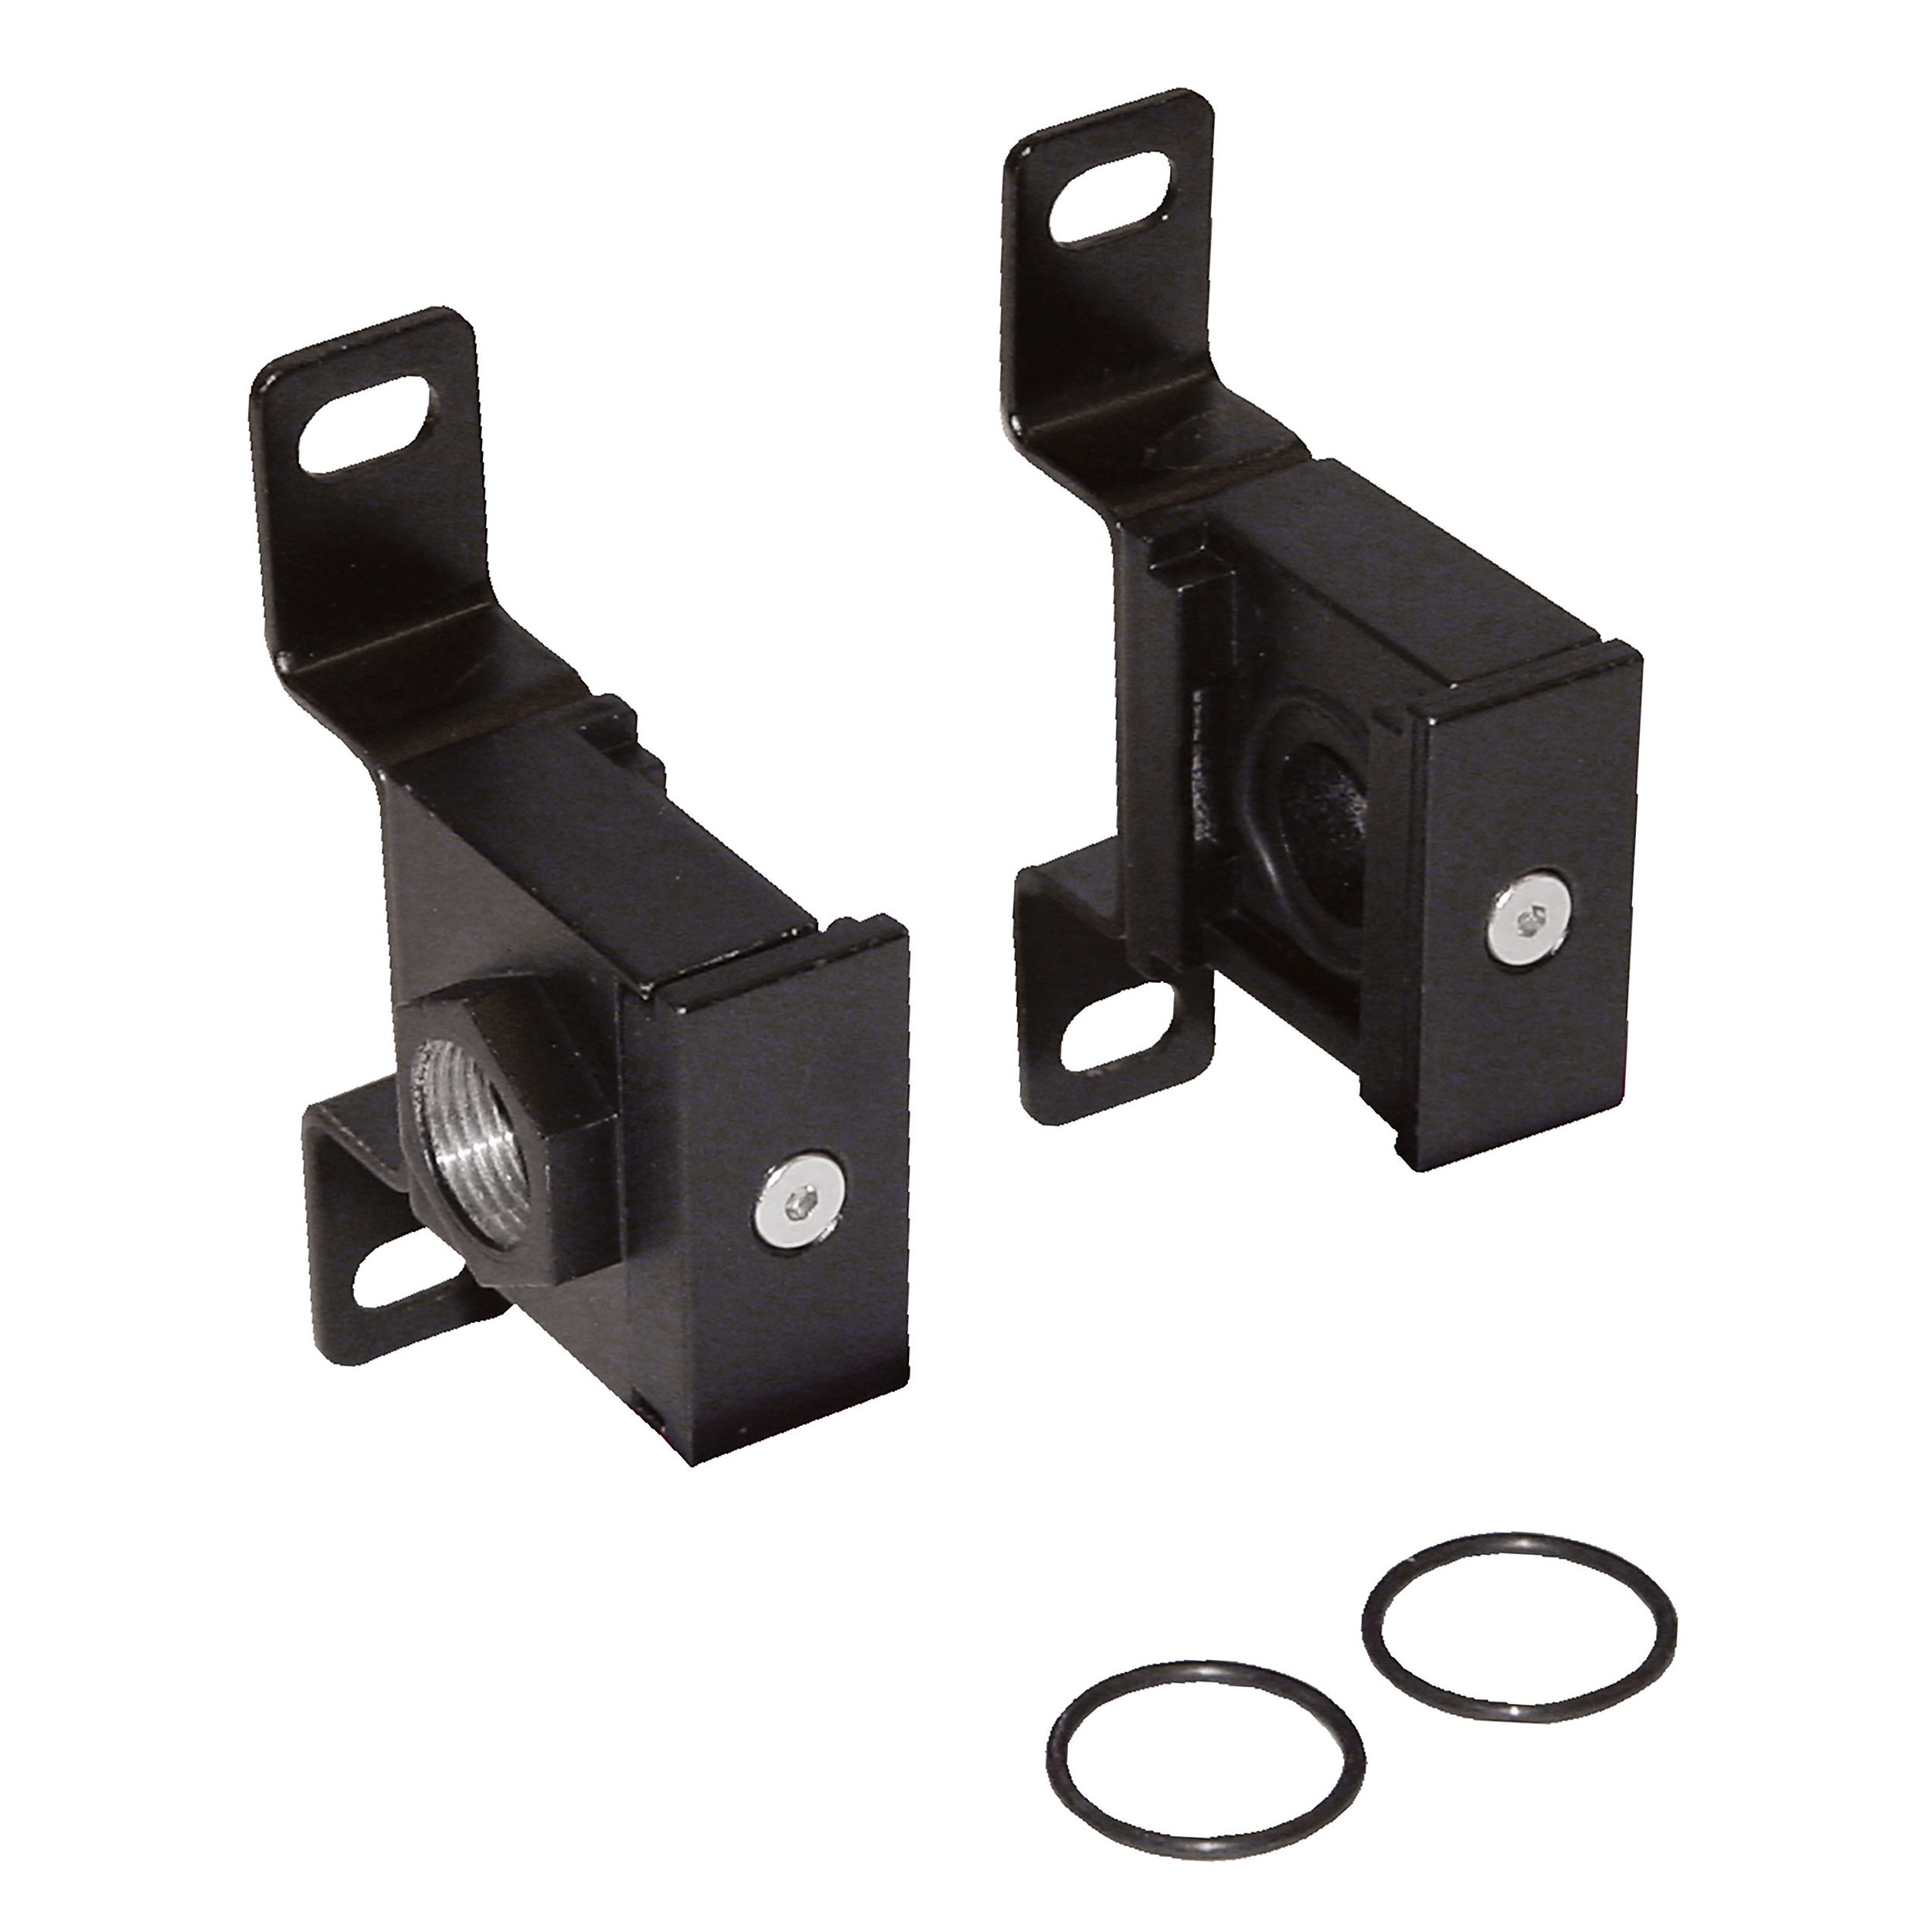 Threaded connection plate set, G⅜, BG 30, without T-bracket, with self-adhesive sealing ring